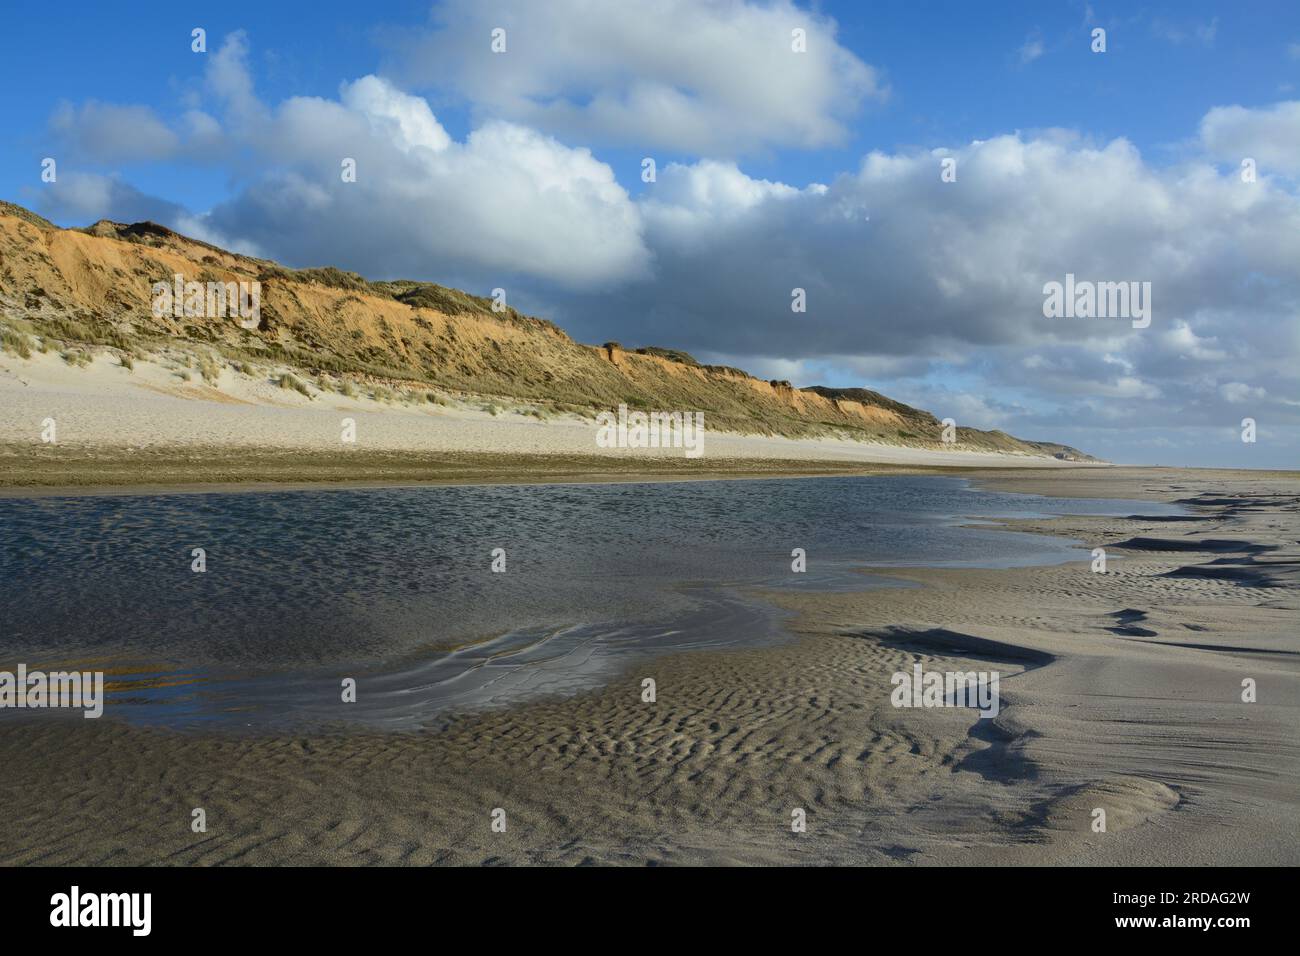 The Red Cliffs / Rotes Kliff between Wenningstedt and Kampen, Sylt, Frisian Islands, North Sea, Germany Stock Photo